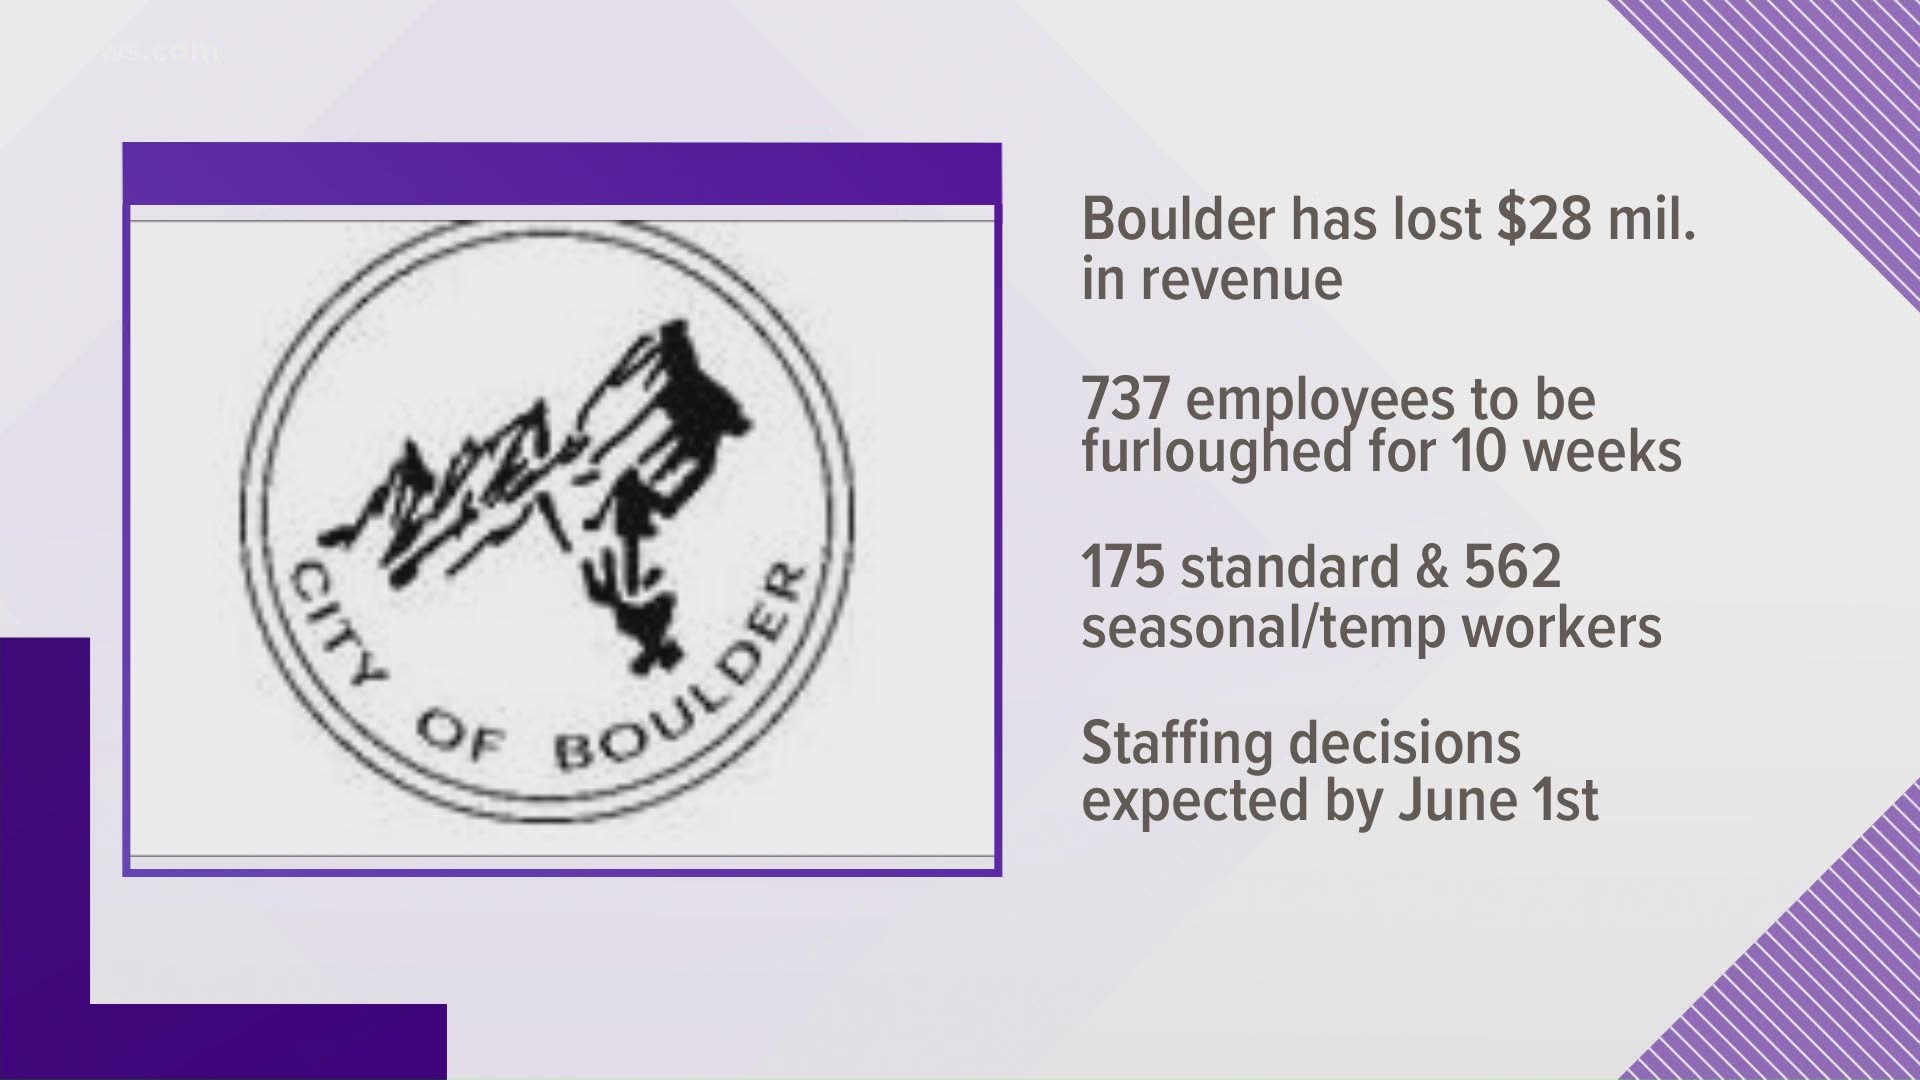 The employees will be furloughed from April 19 to June 28, but still receive health insurance.